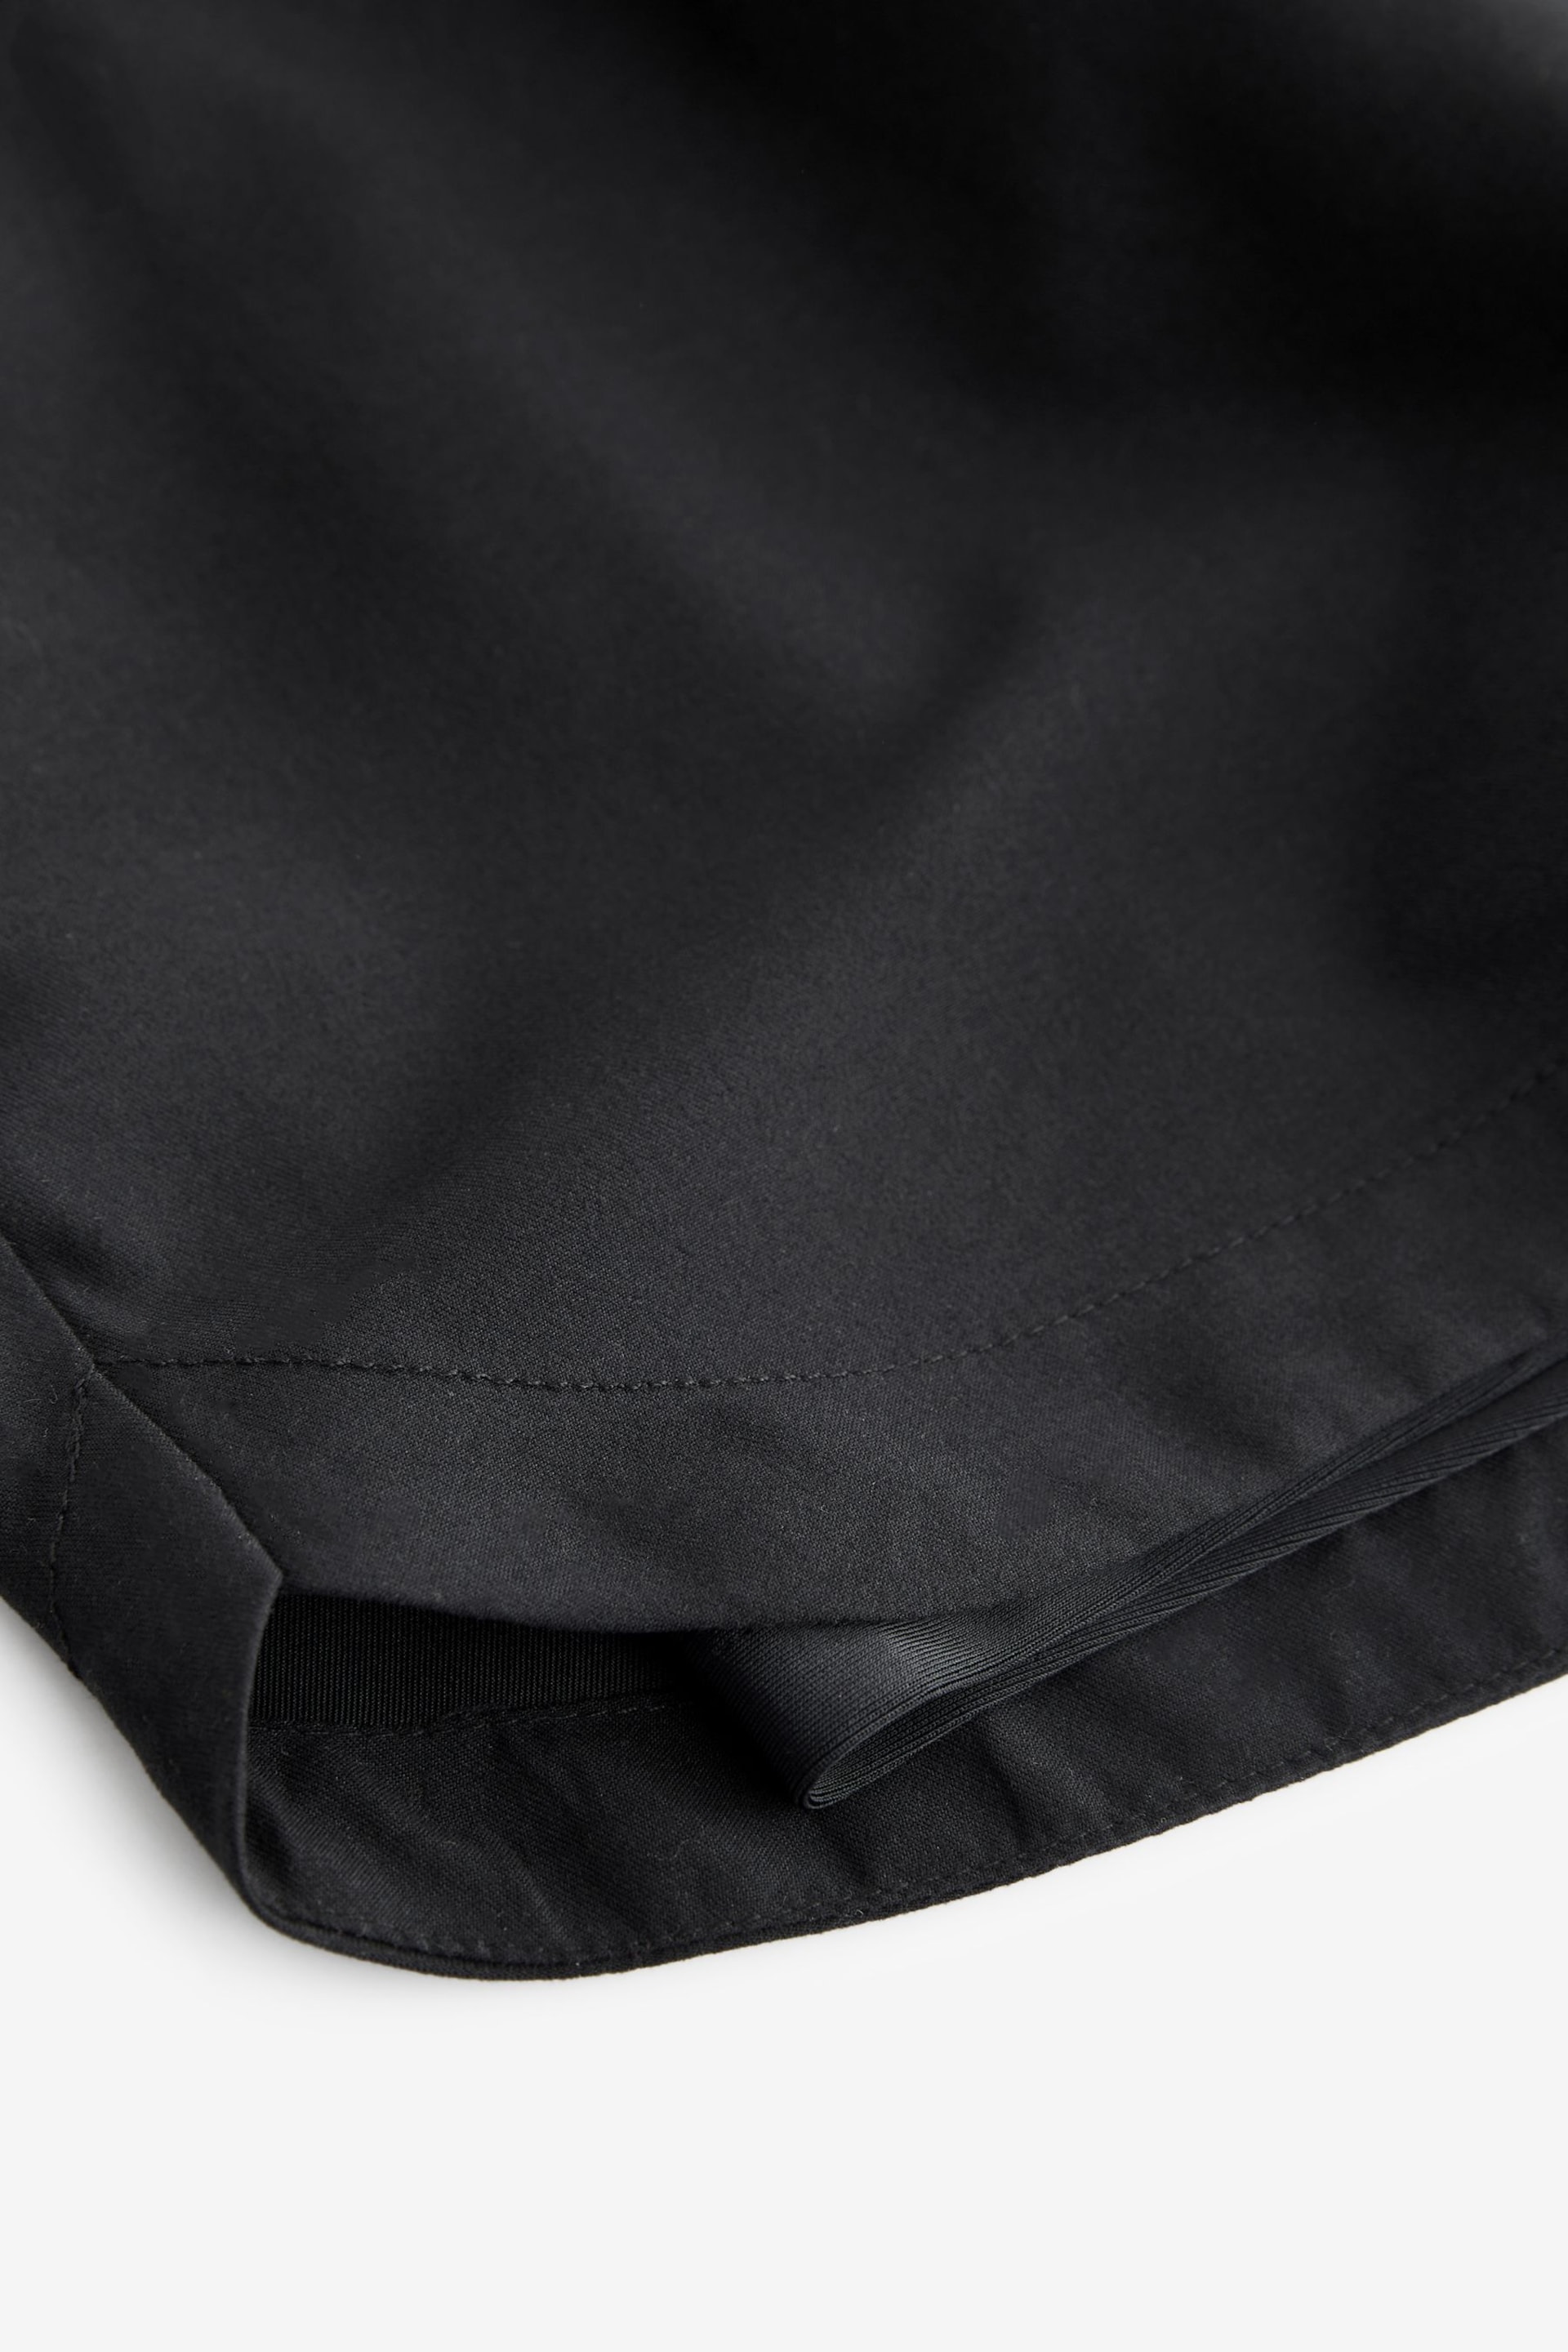 Black 2-In-1 Shorts - Image 7 of 7